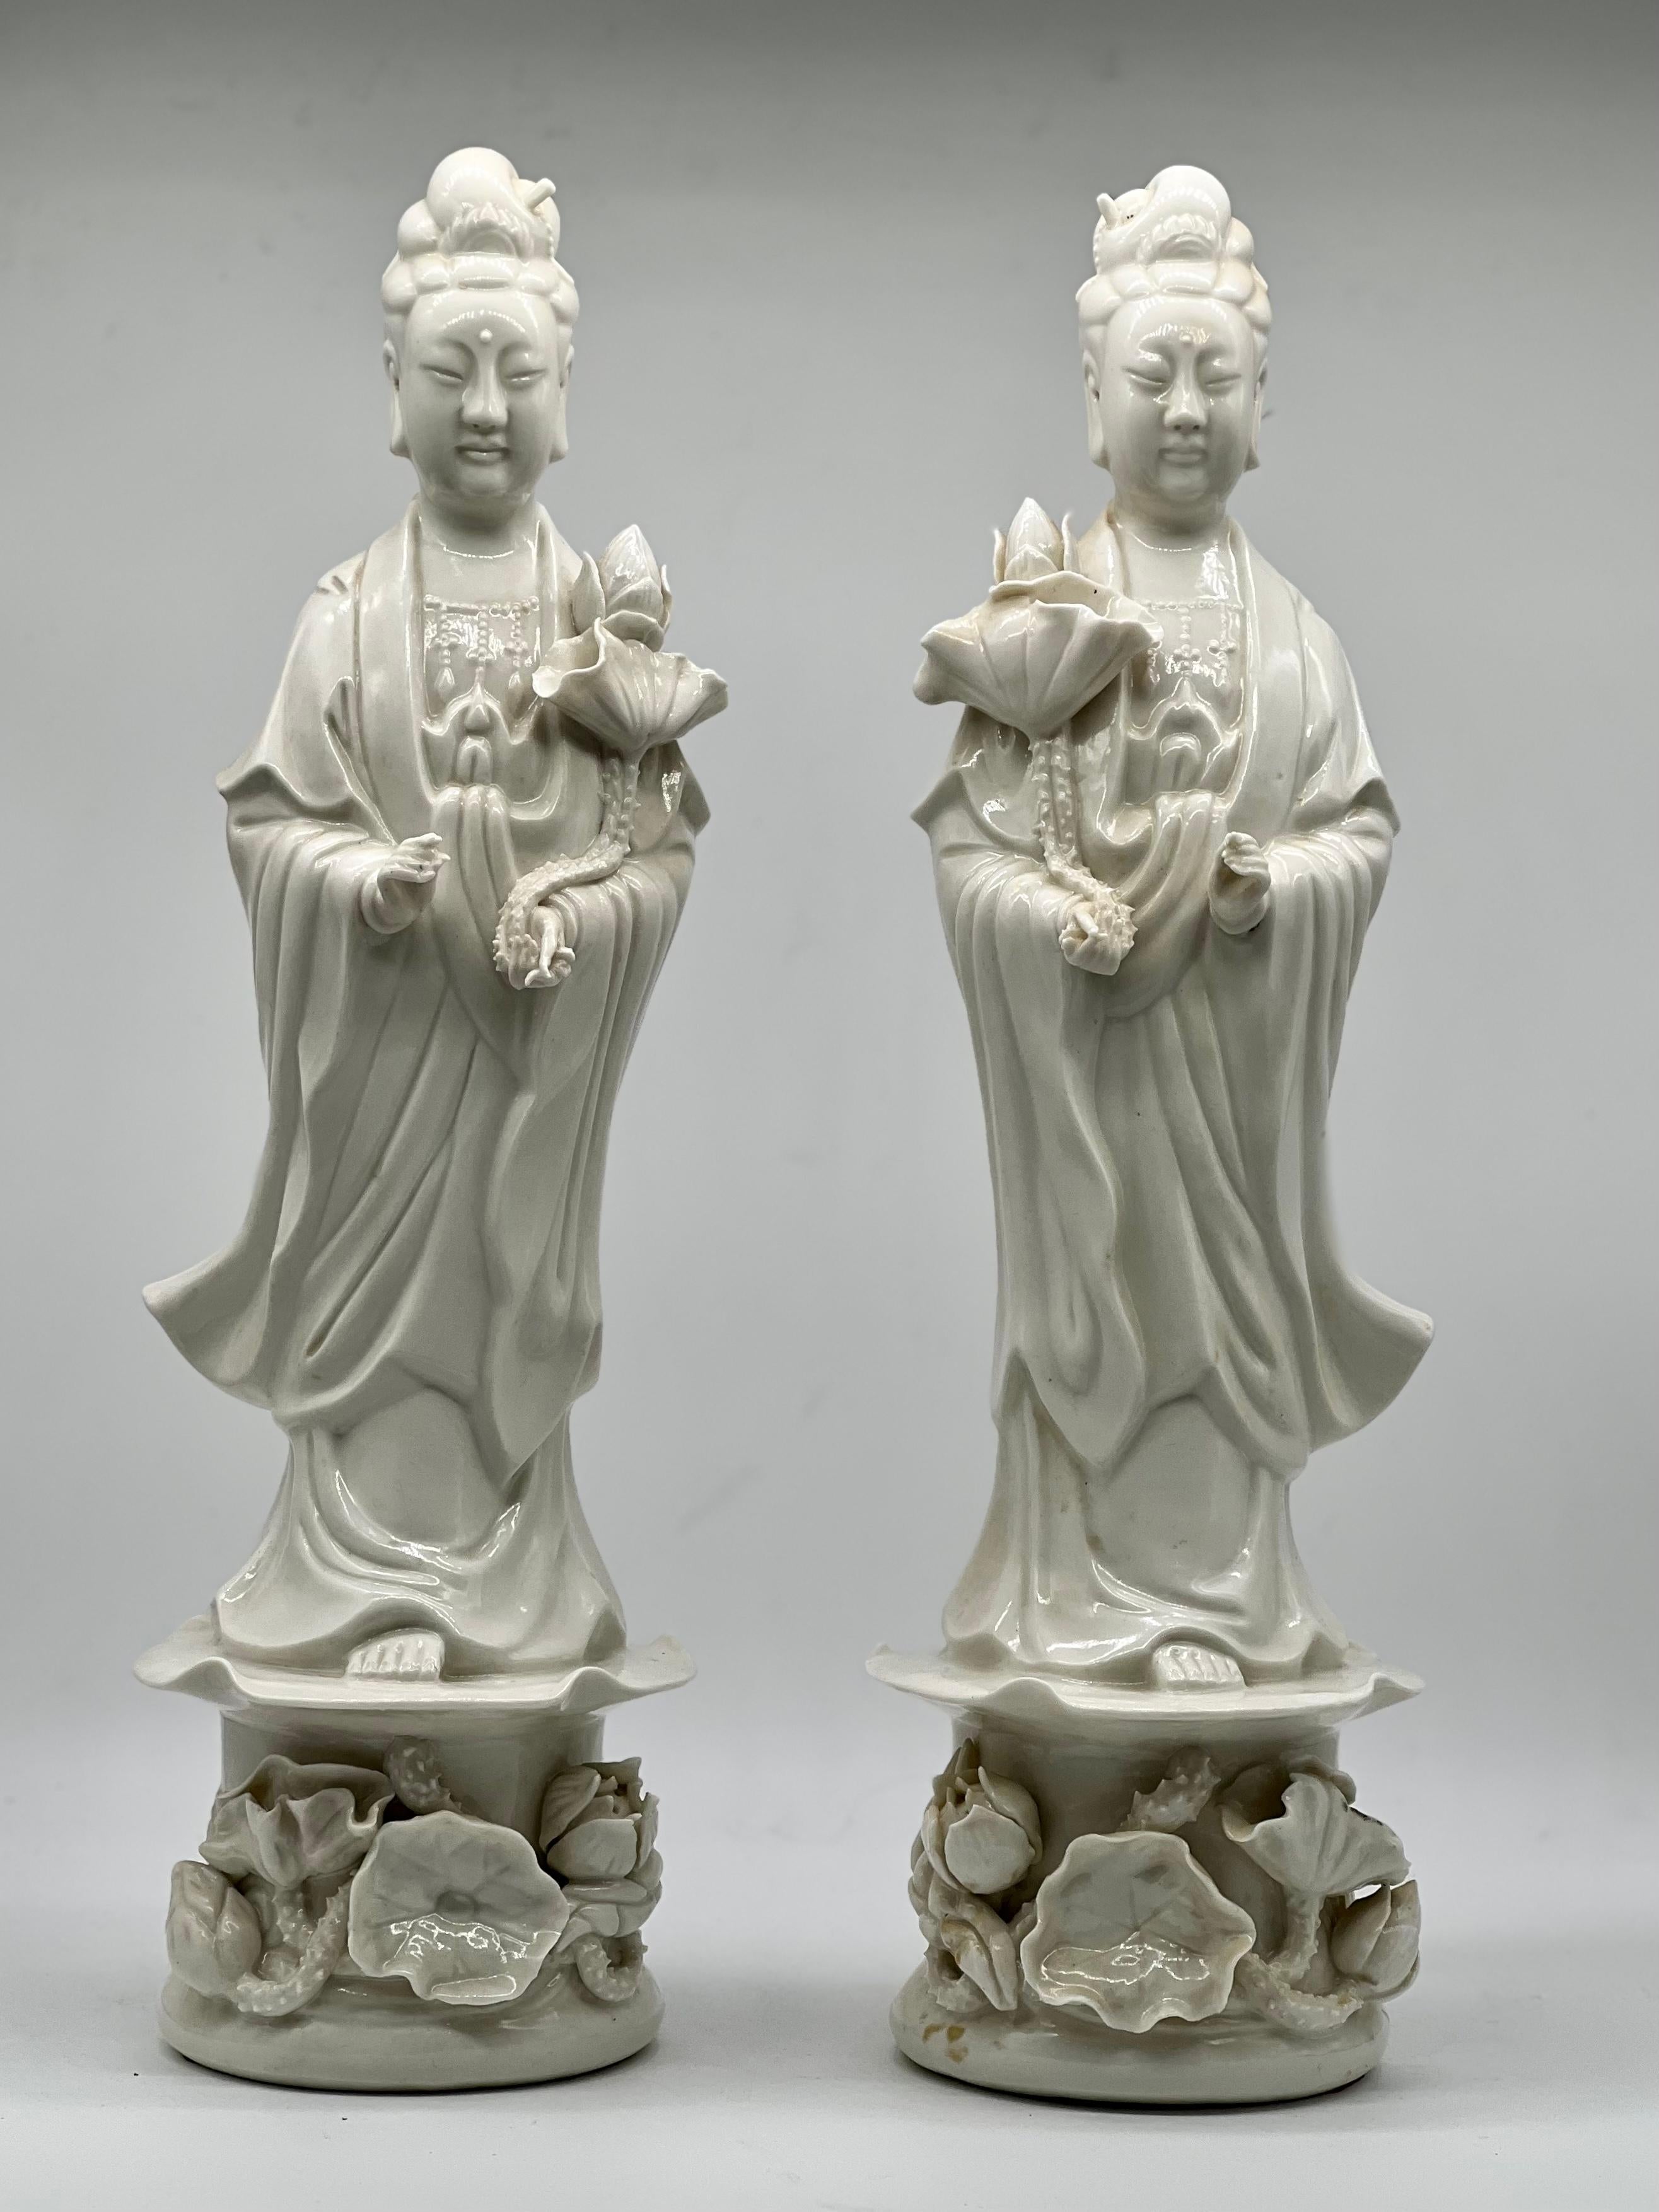 A Exquisite and large pair of blanc de Chine Statues of Guanyin. Republic period of China. 

Chinese Blanc de Chine statues of 
Guan Yin 
Republic period of China. 

The goddesses are dressed in flowing robes standing on an intricate lotus and